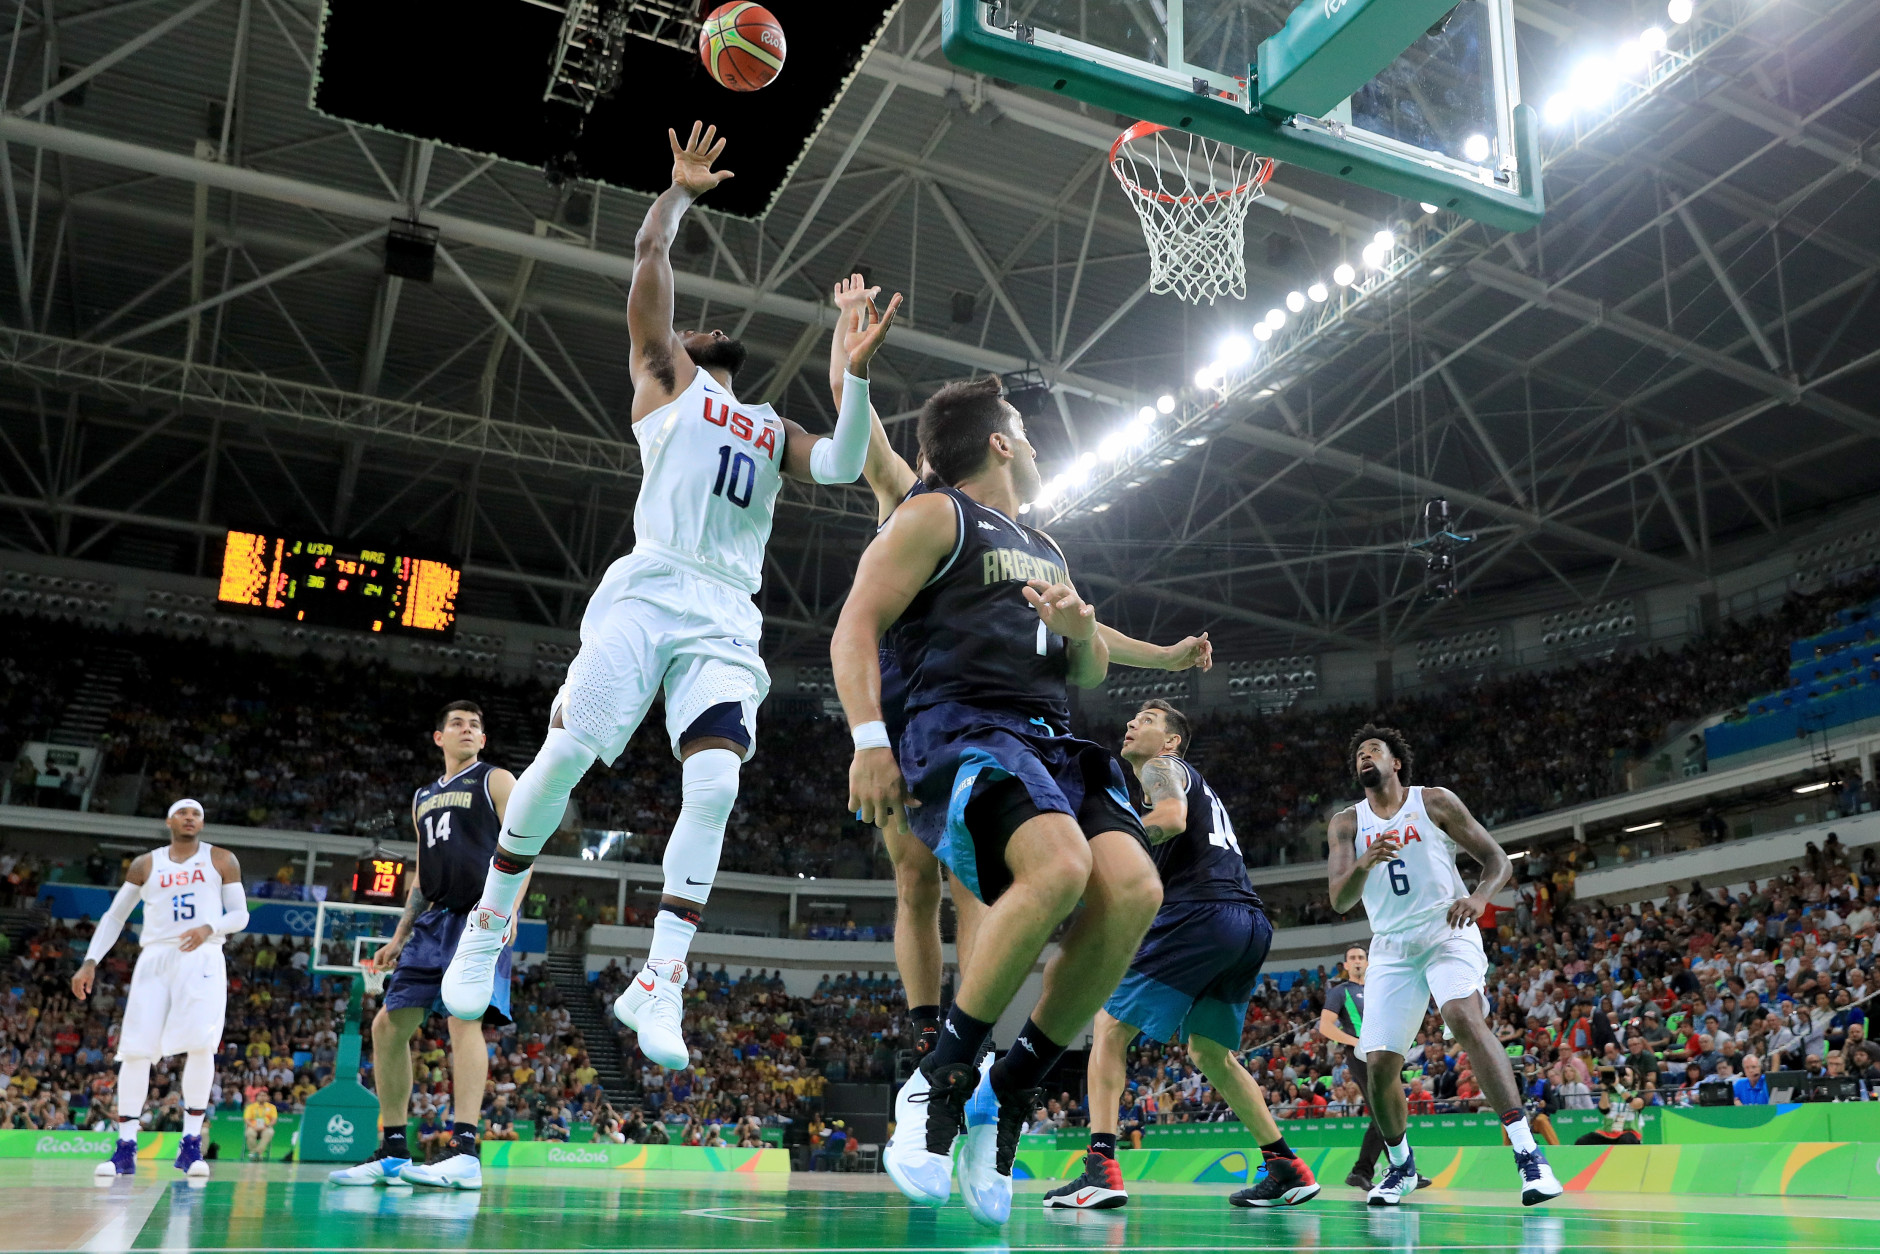 RIO DE JANEIRO, BRAZIL - AUGUST 17:  Kyrie Irving #10 of United States goes up for a shot in the lane against Argentina during the Men's Basketball Quarterfinal game at Carioca Arena 1 on Day 12 of the Rio 2016 Olympic Games on August 17, 2016 in Rio de Janeiro, Brazil.  (Photo by Tom Pennington/Getty Images)